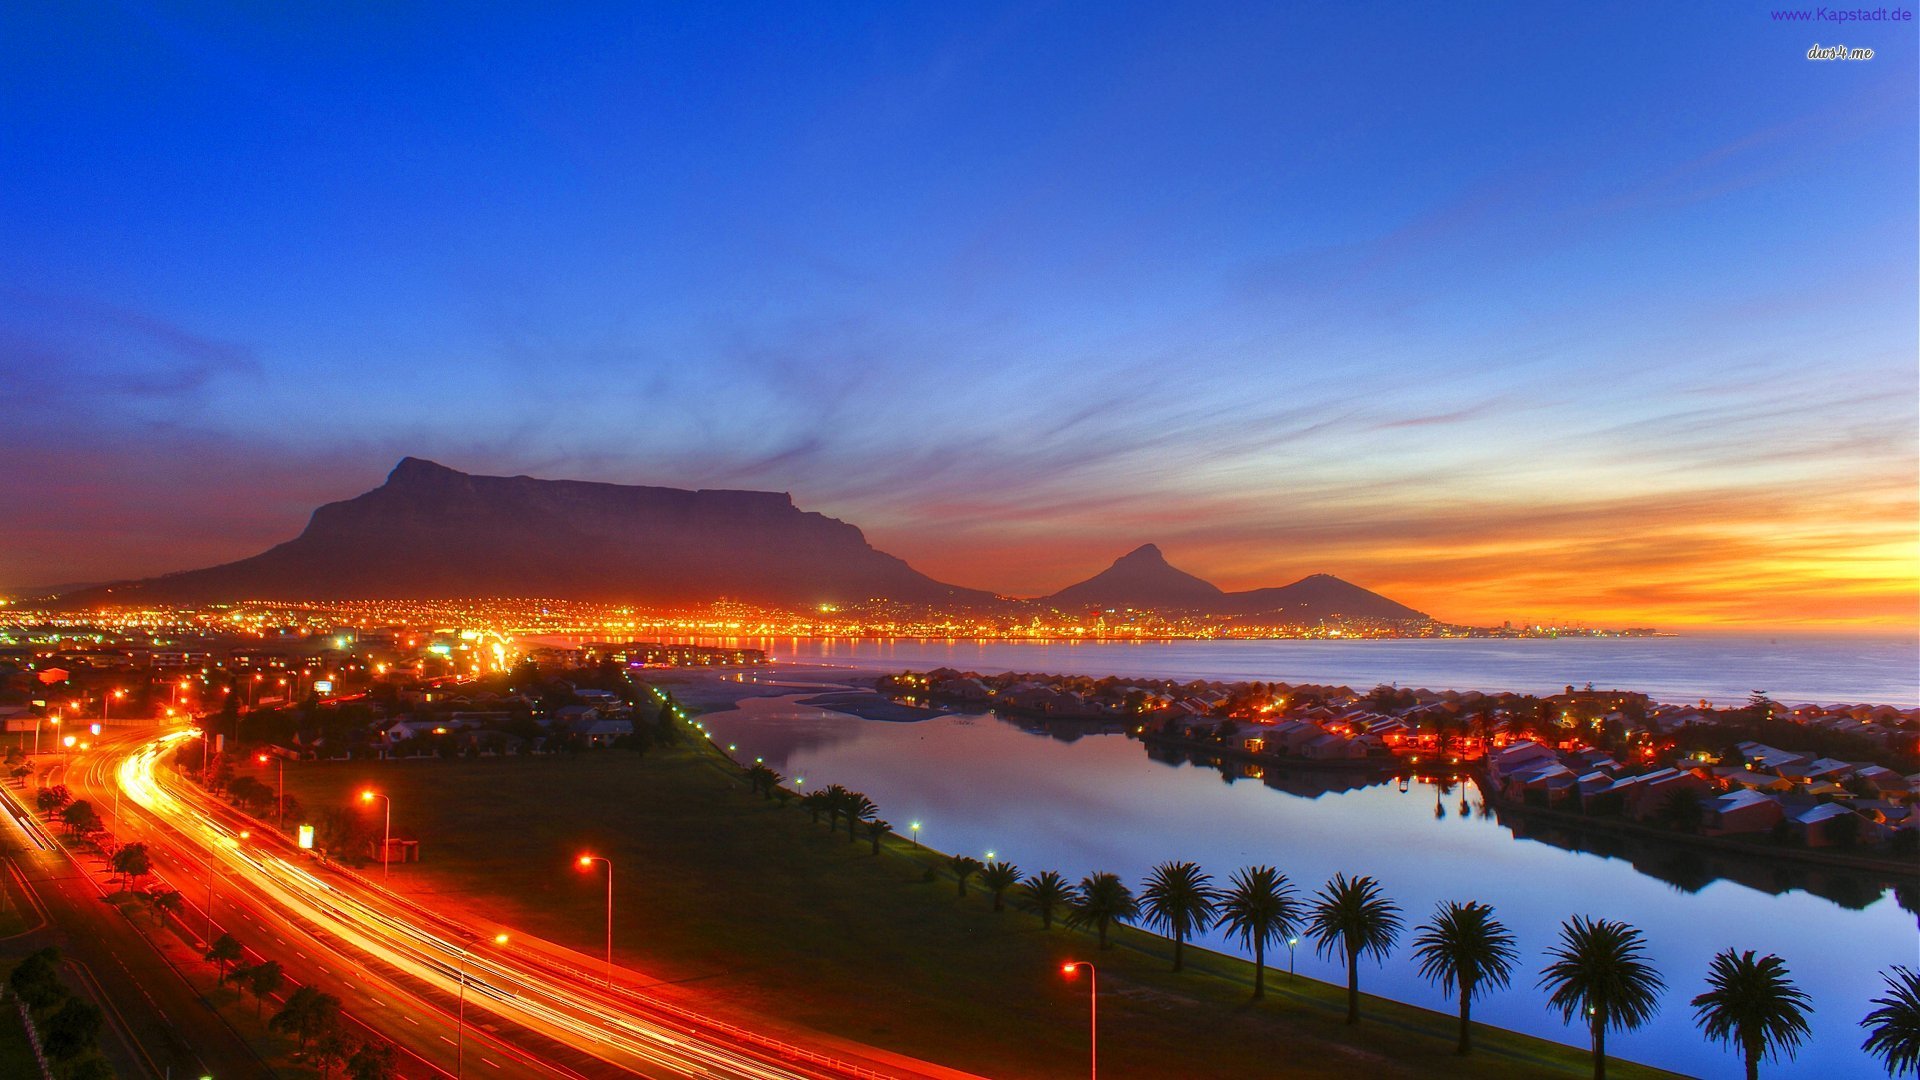 Free download cape town hd wallpapers x for your desktop mobile tablet explore town wallpaper cape town south africa wallpaper cape town wallpaper ghost town wallpaper